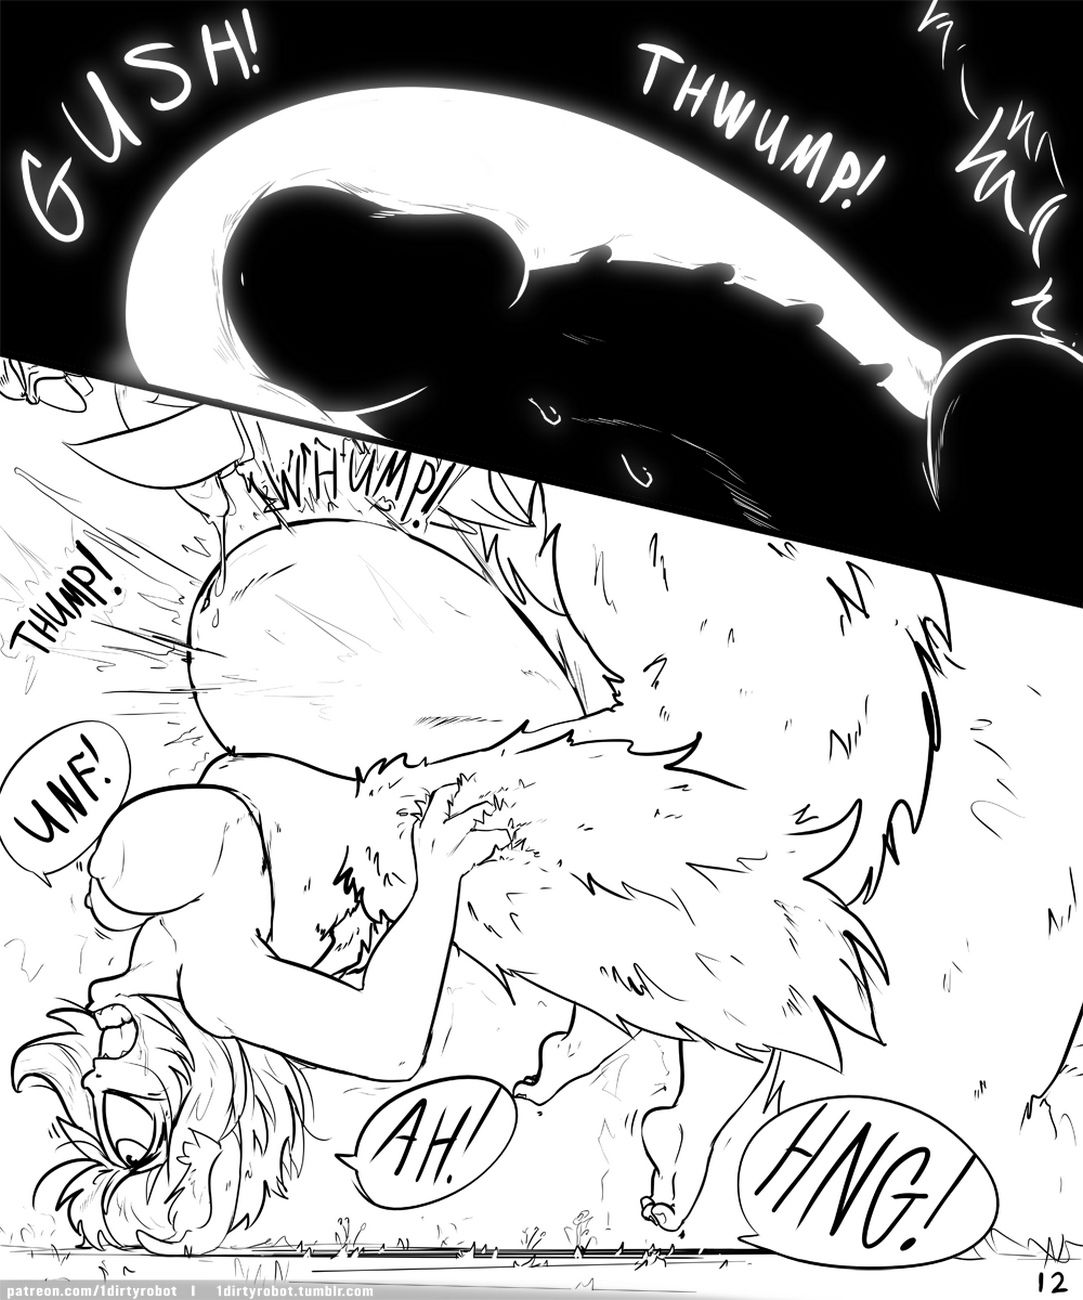 Big Trouble In Little Yordle page 1